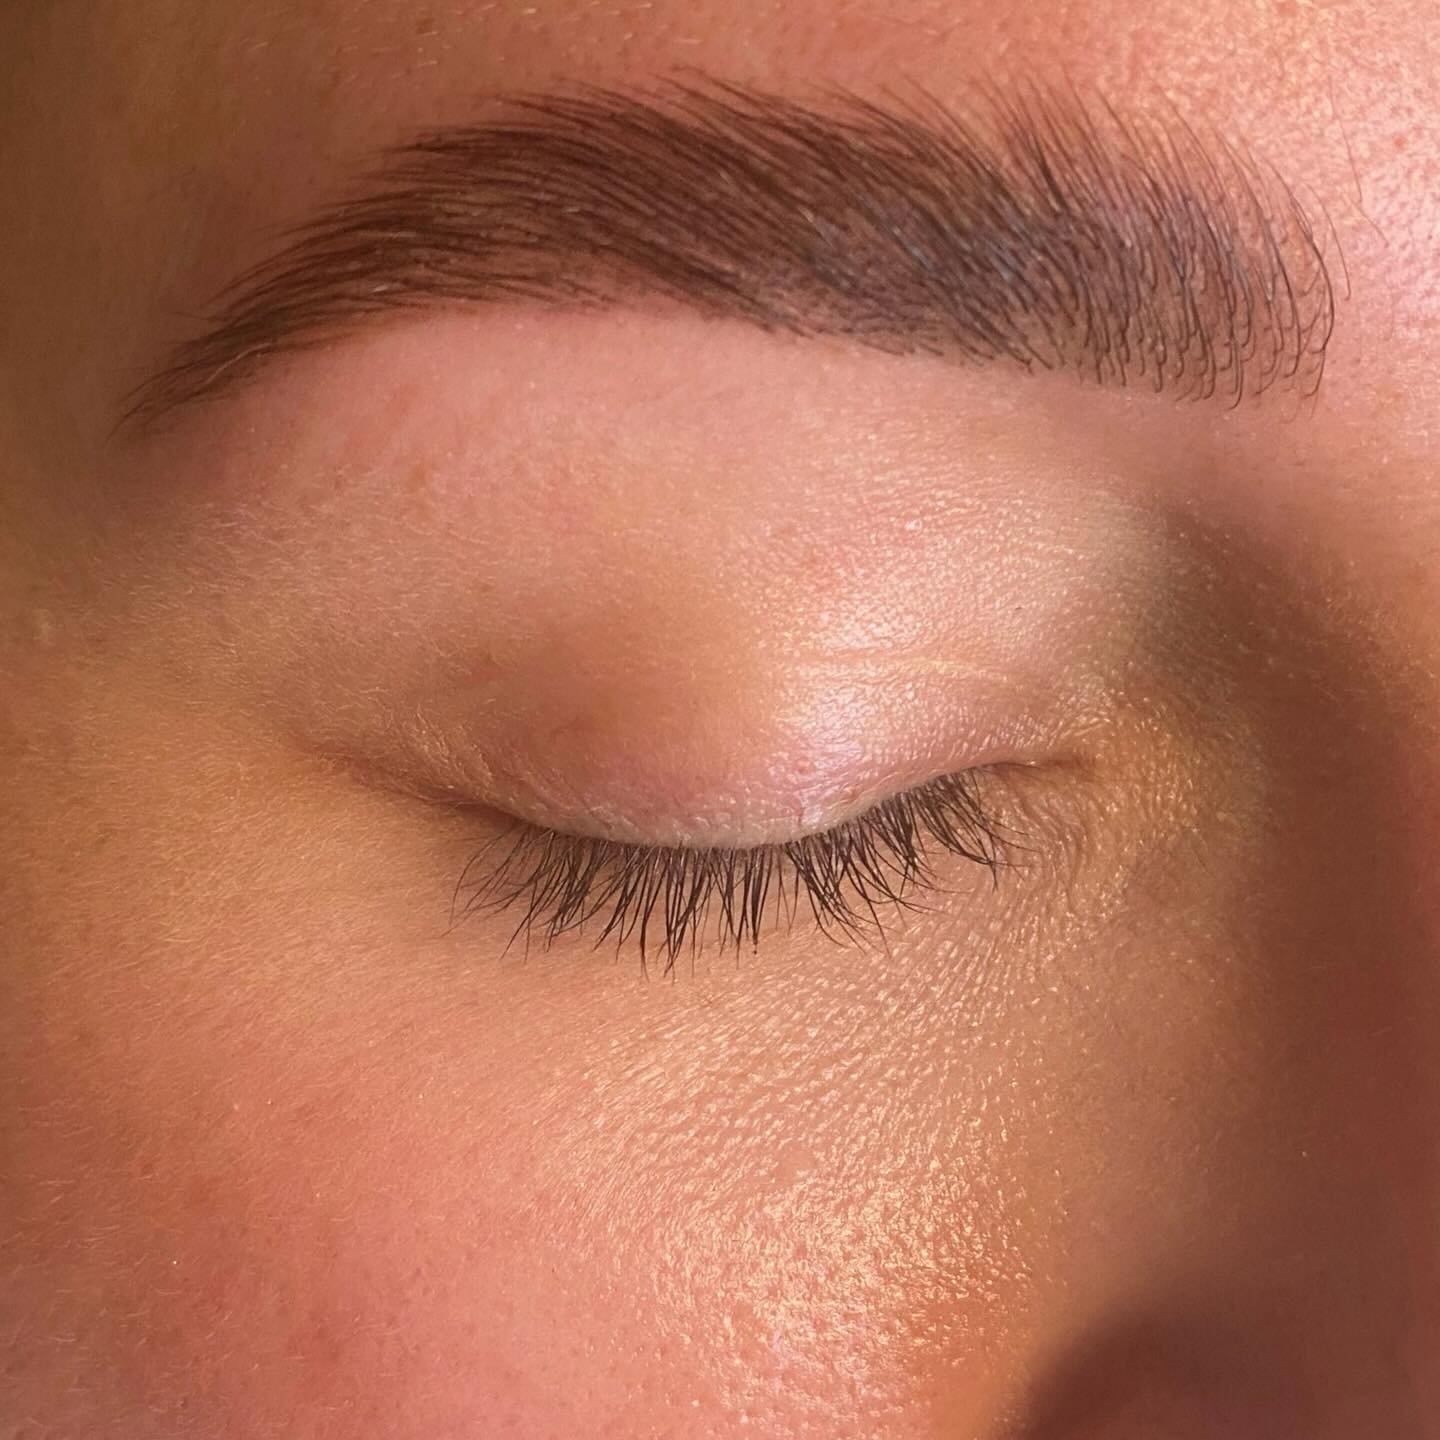 Swipe for before ➡️
Here we have our signature lamination BEFORE brow butter (the last step to rehydrate the brows &amp; skin). This is what our client can look forward to working with from day two!

So many people think brow lamination will leave yo